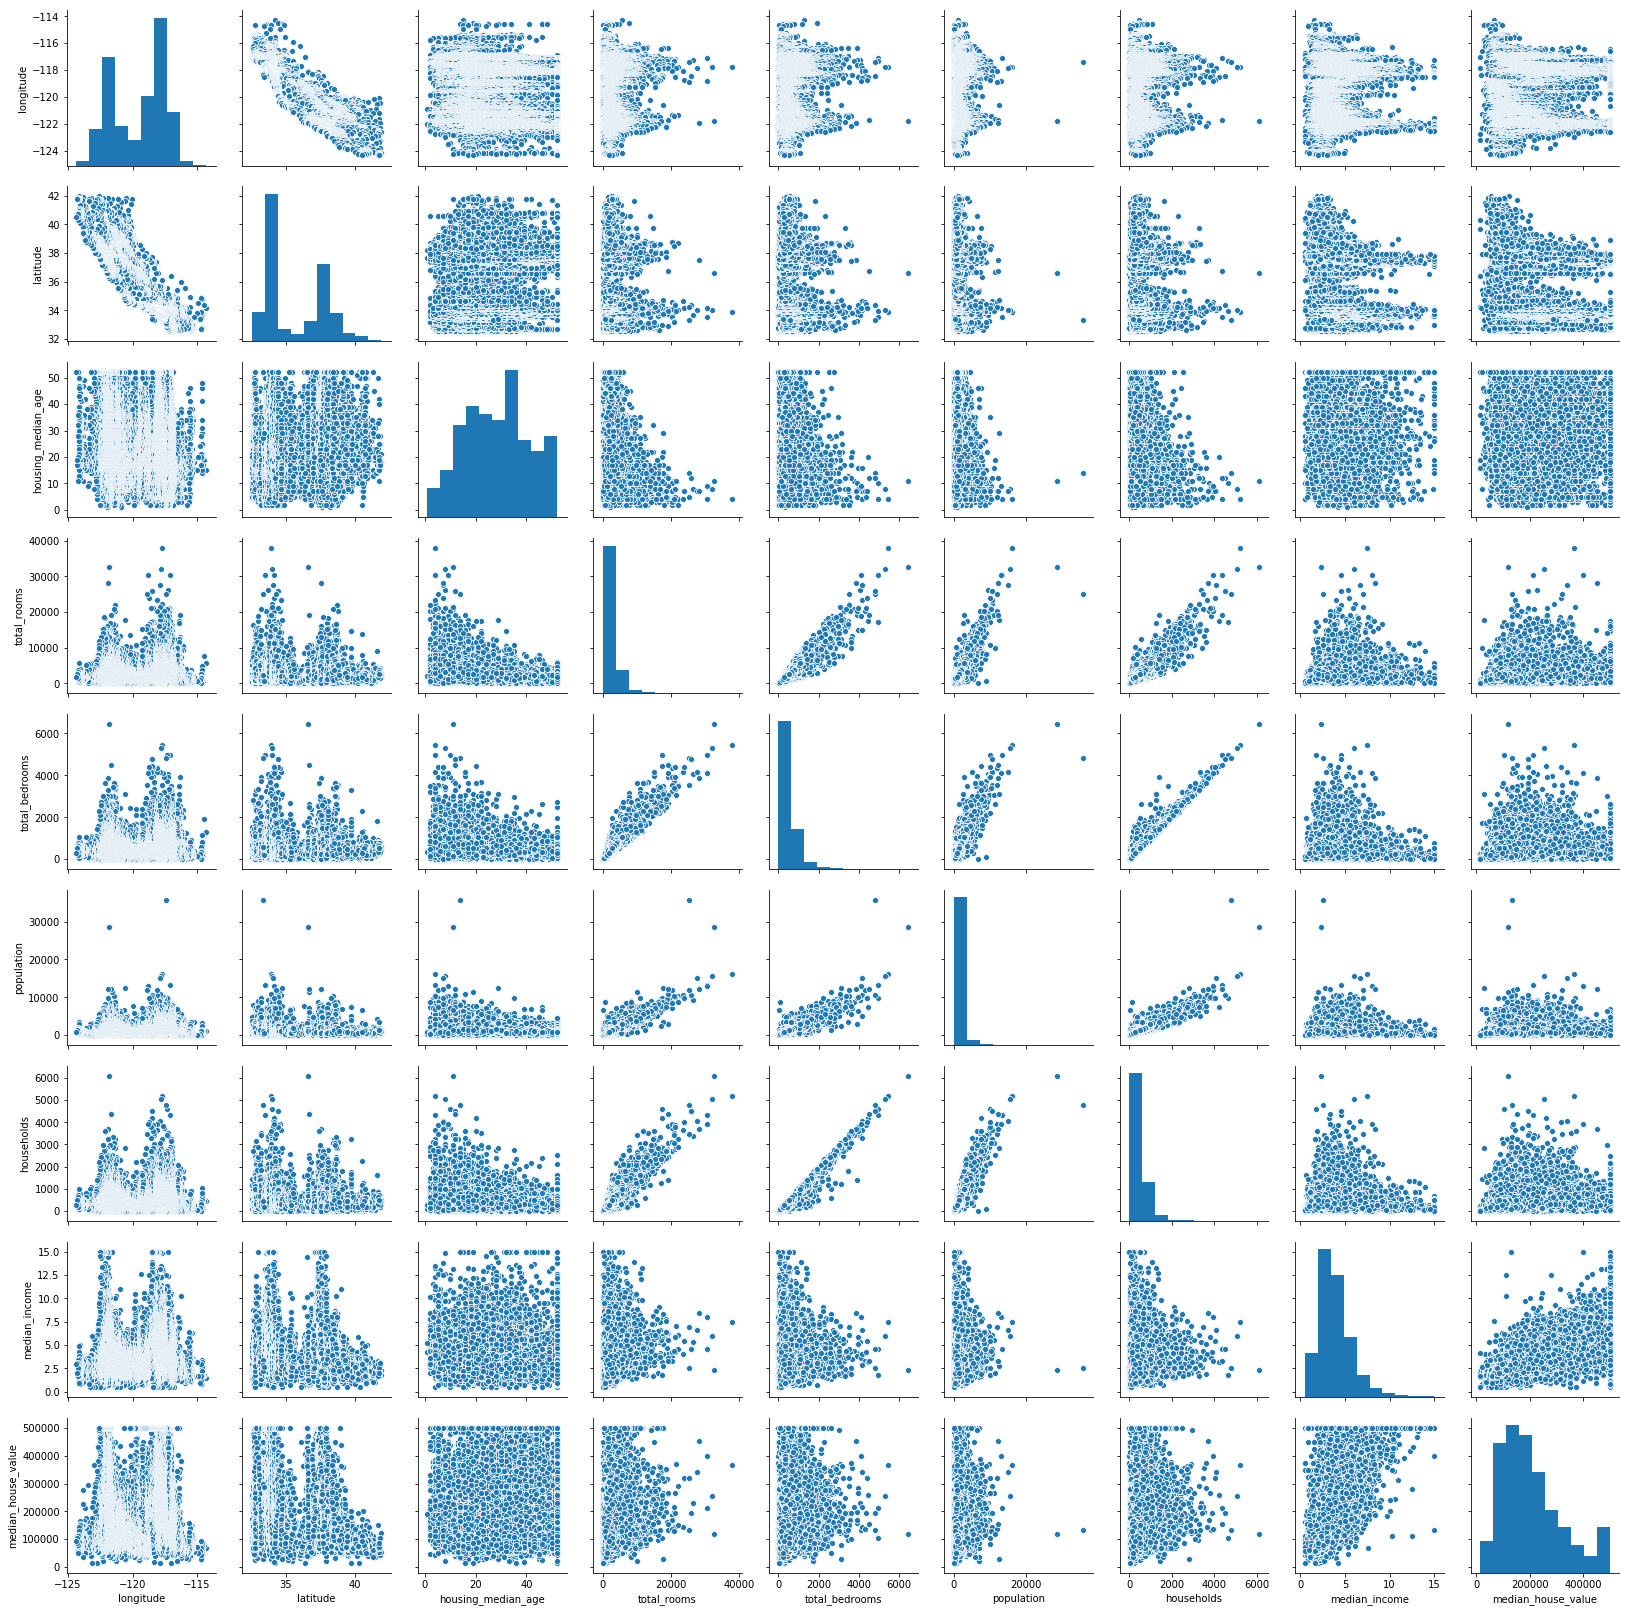 _images/12_Introduction_to_Matplotlib_27_1.png